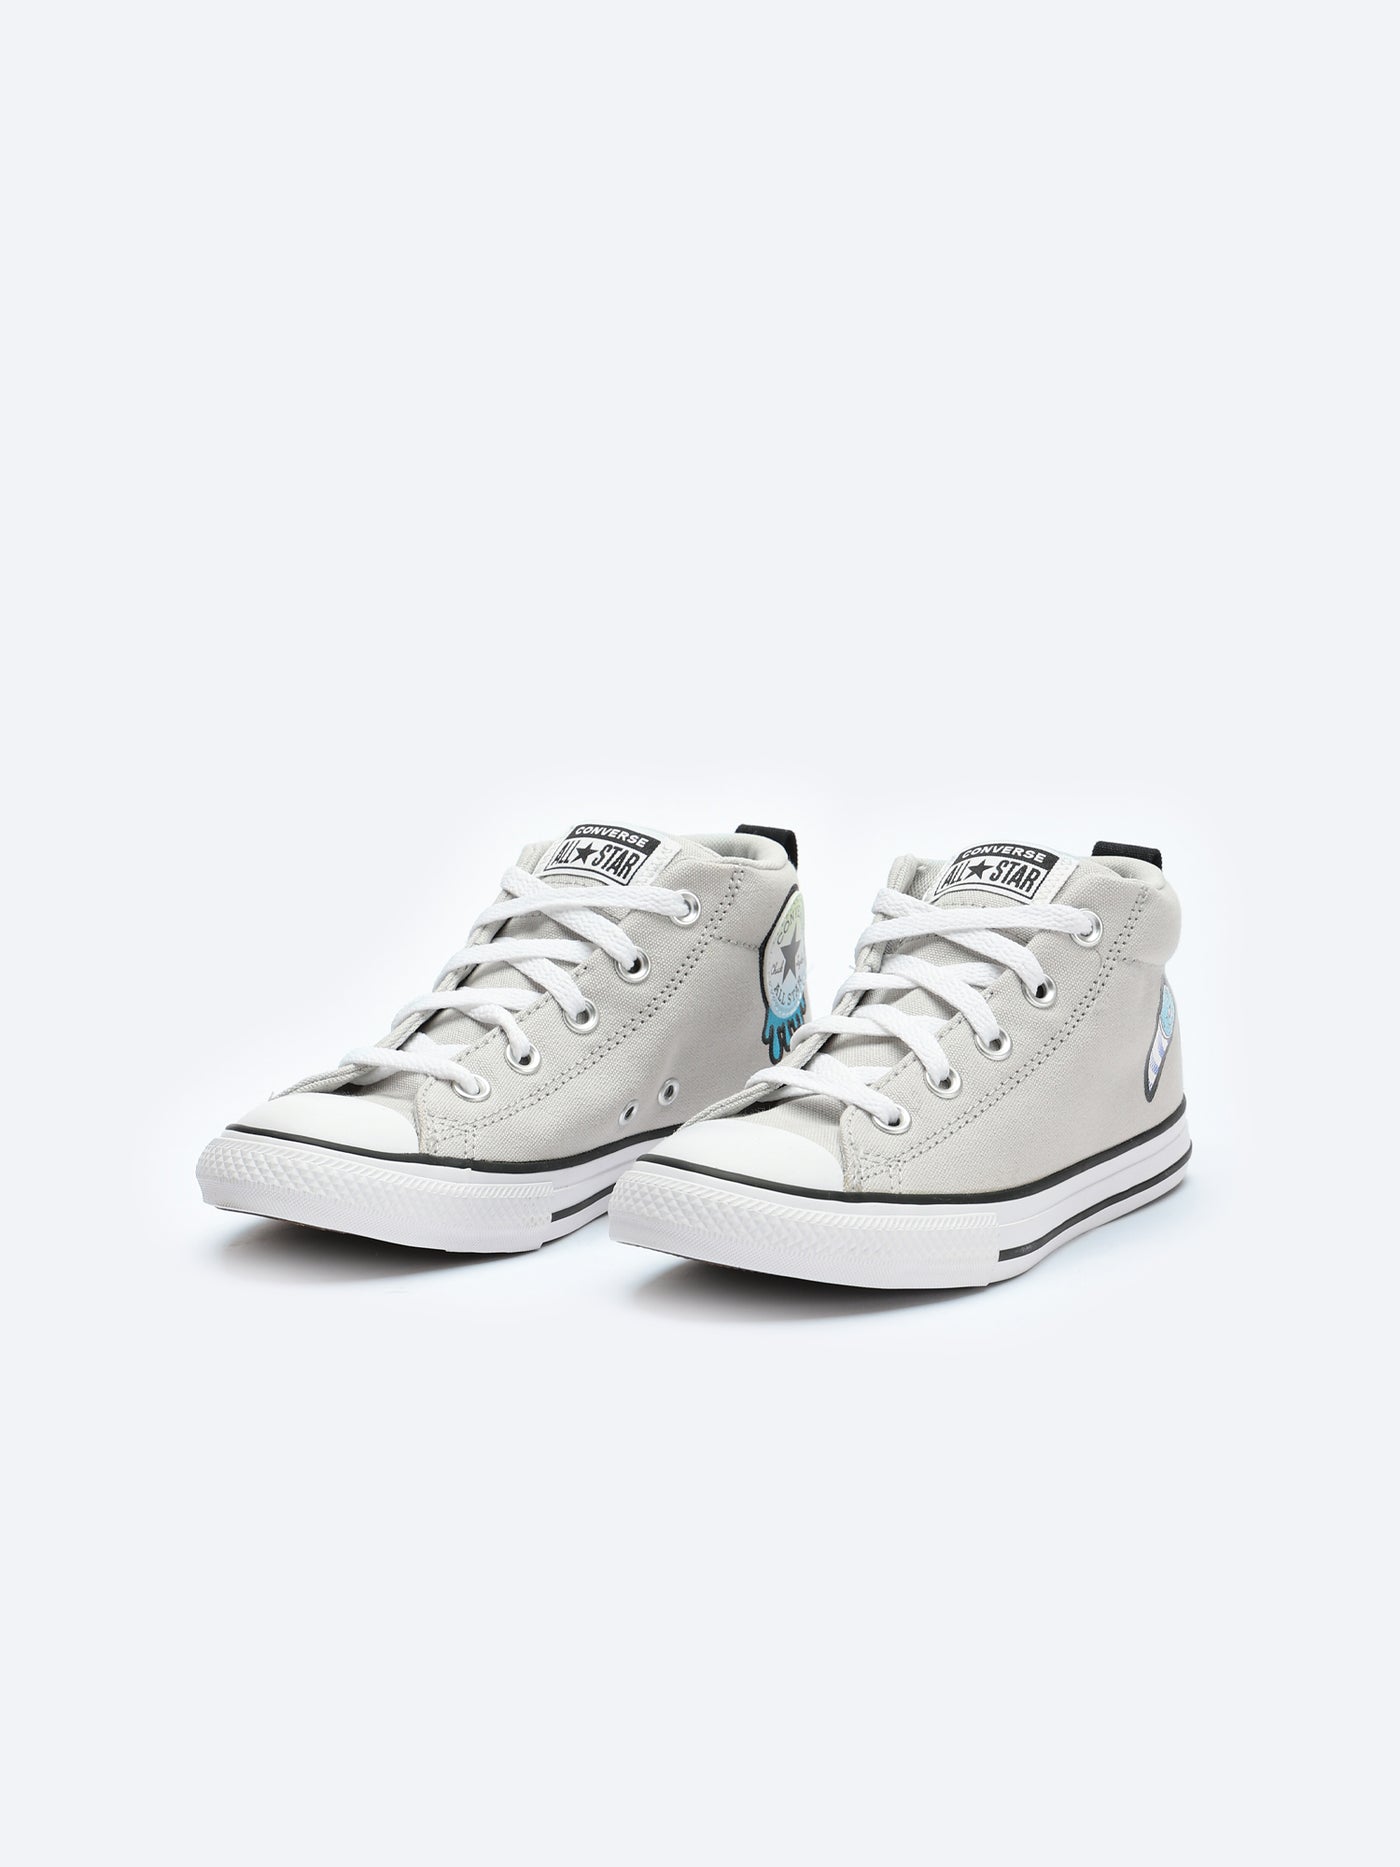 Converse Kids Boys Ankle Length Sneakers